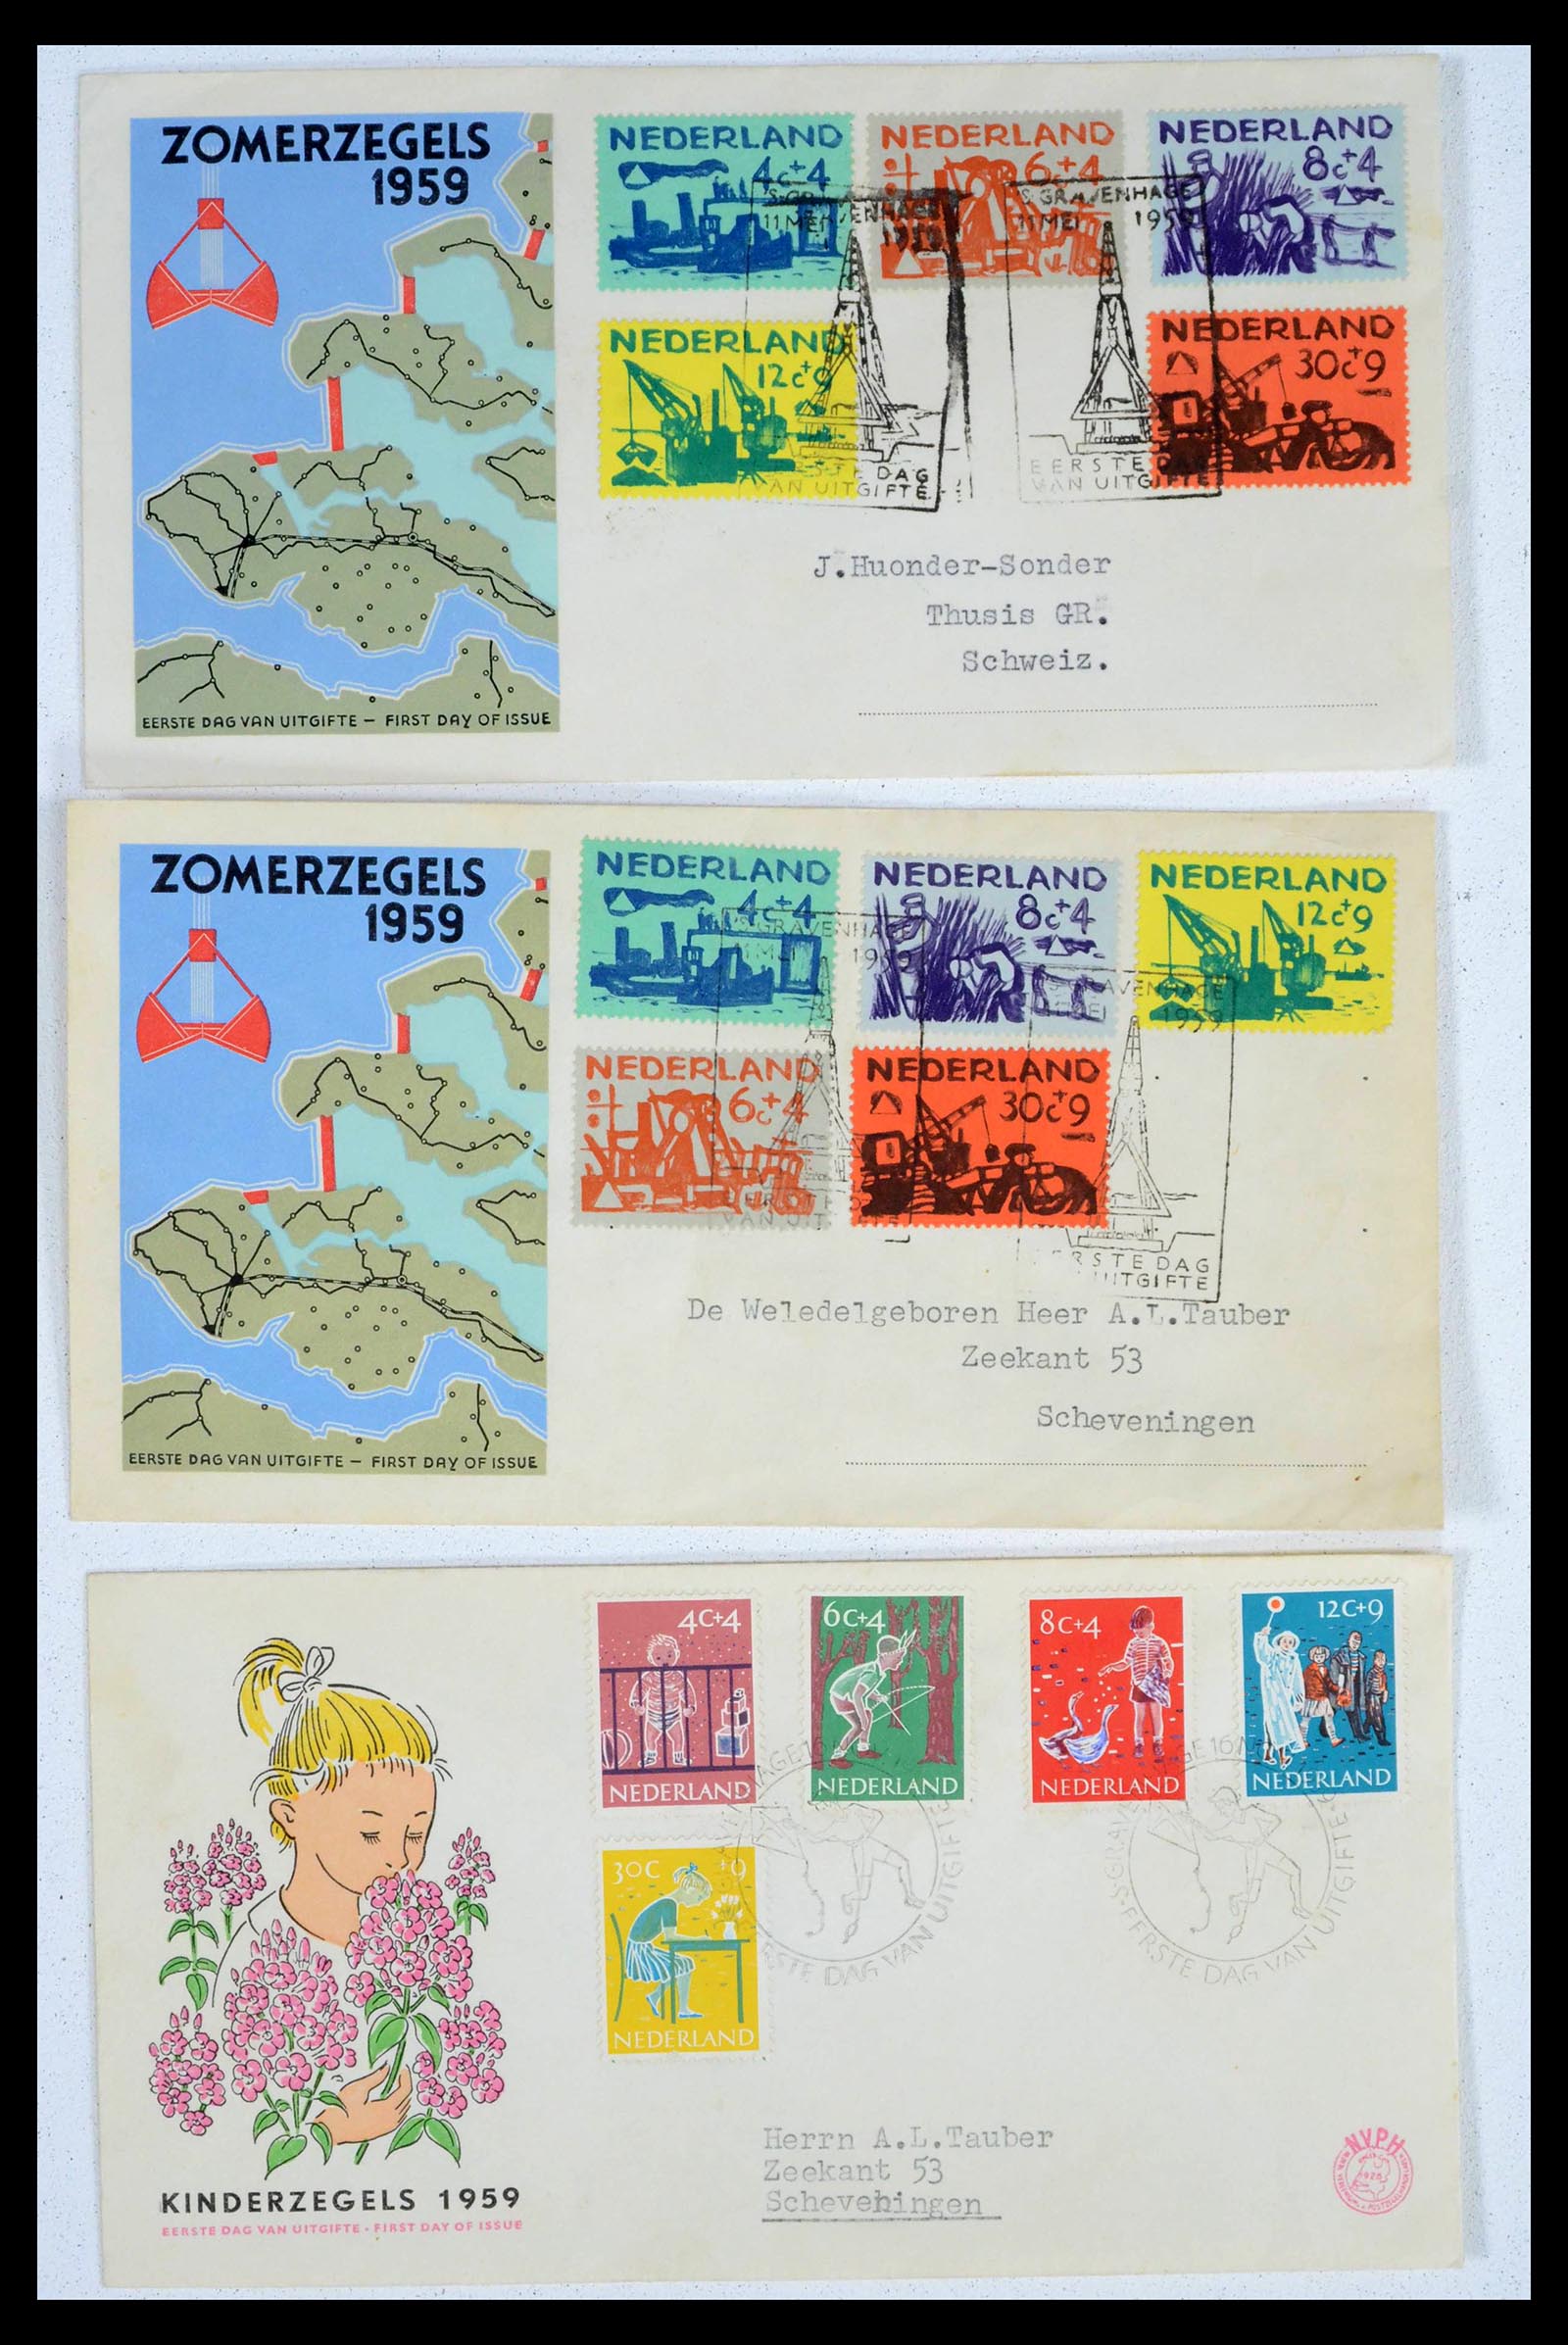 39474 0021 - Stamp collection 39474 Netherlands FDC's 1950-1960.